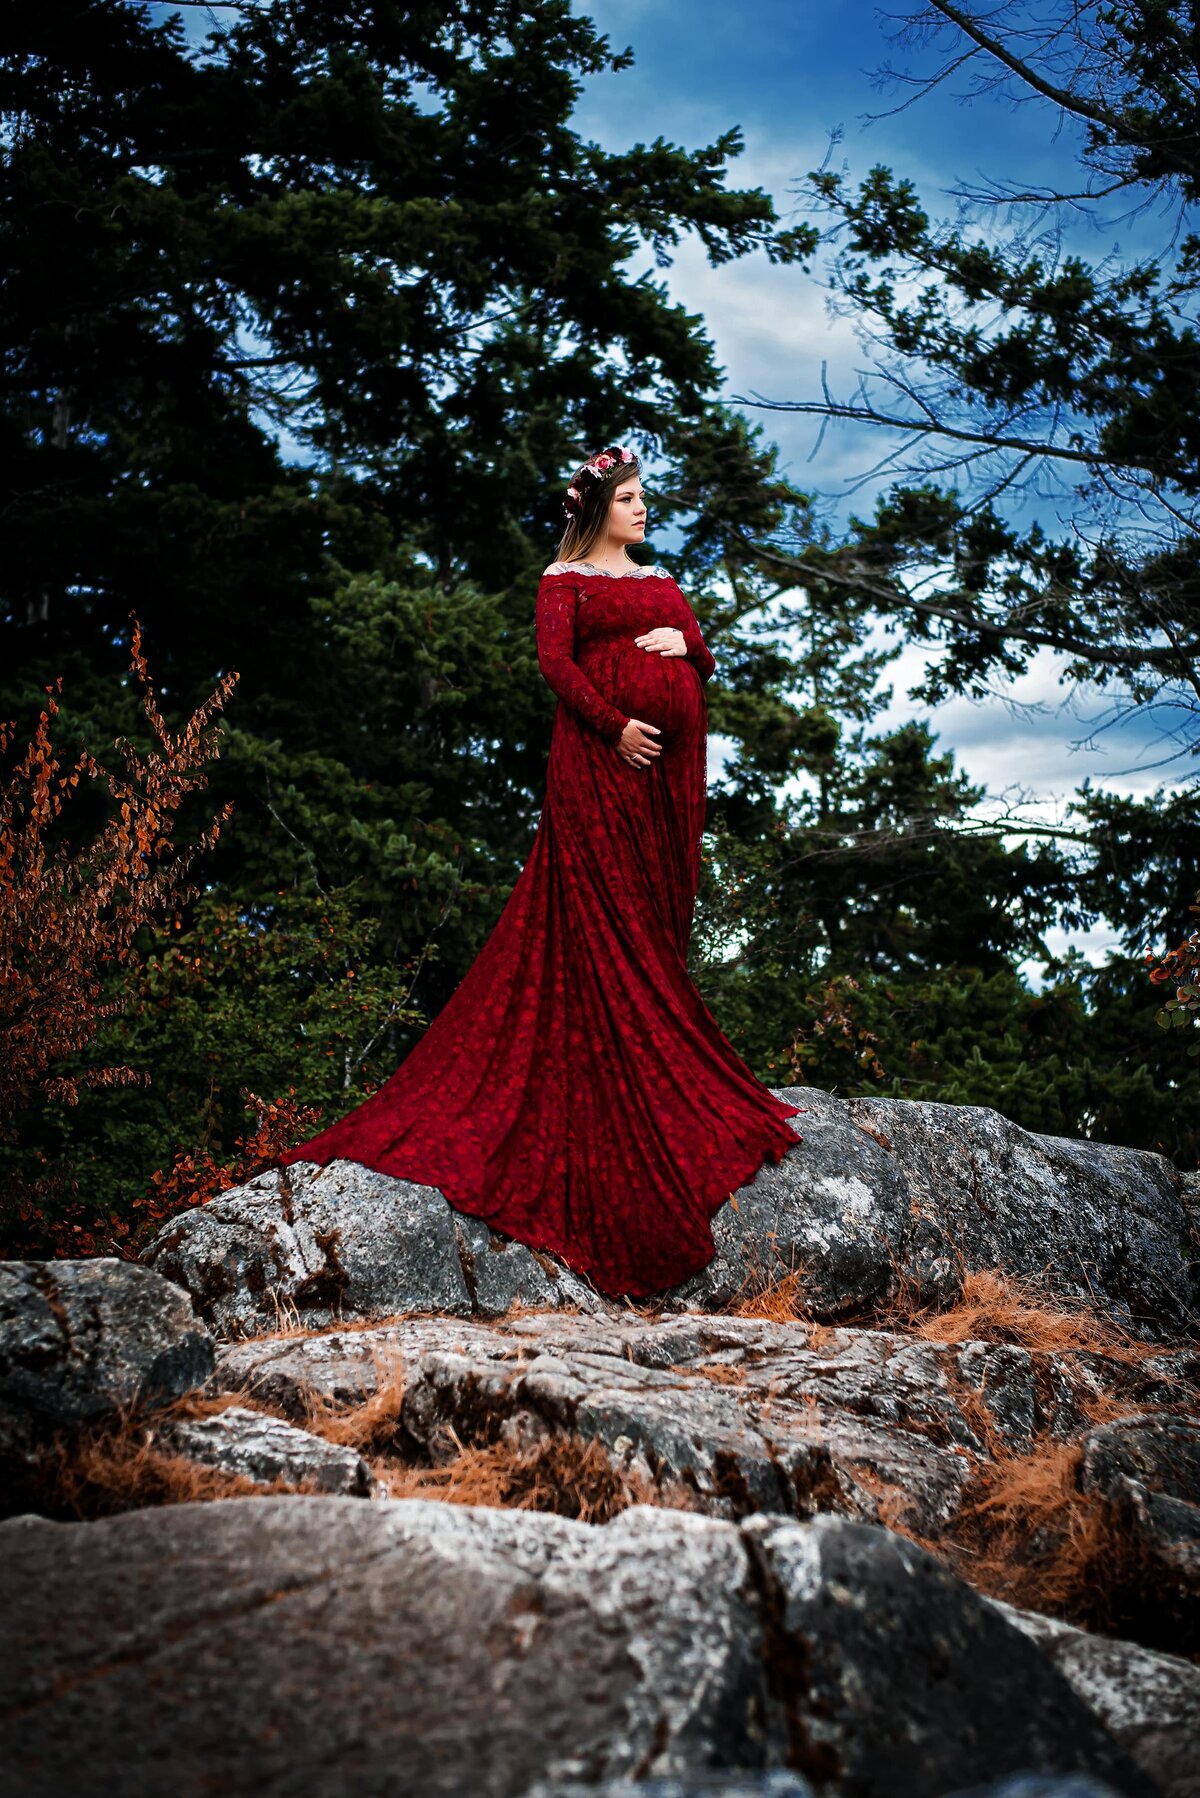 Expectant mom-to-be in red lace dress on a rocky mountain top.